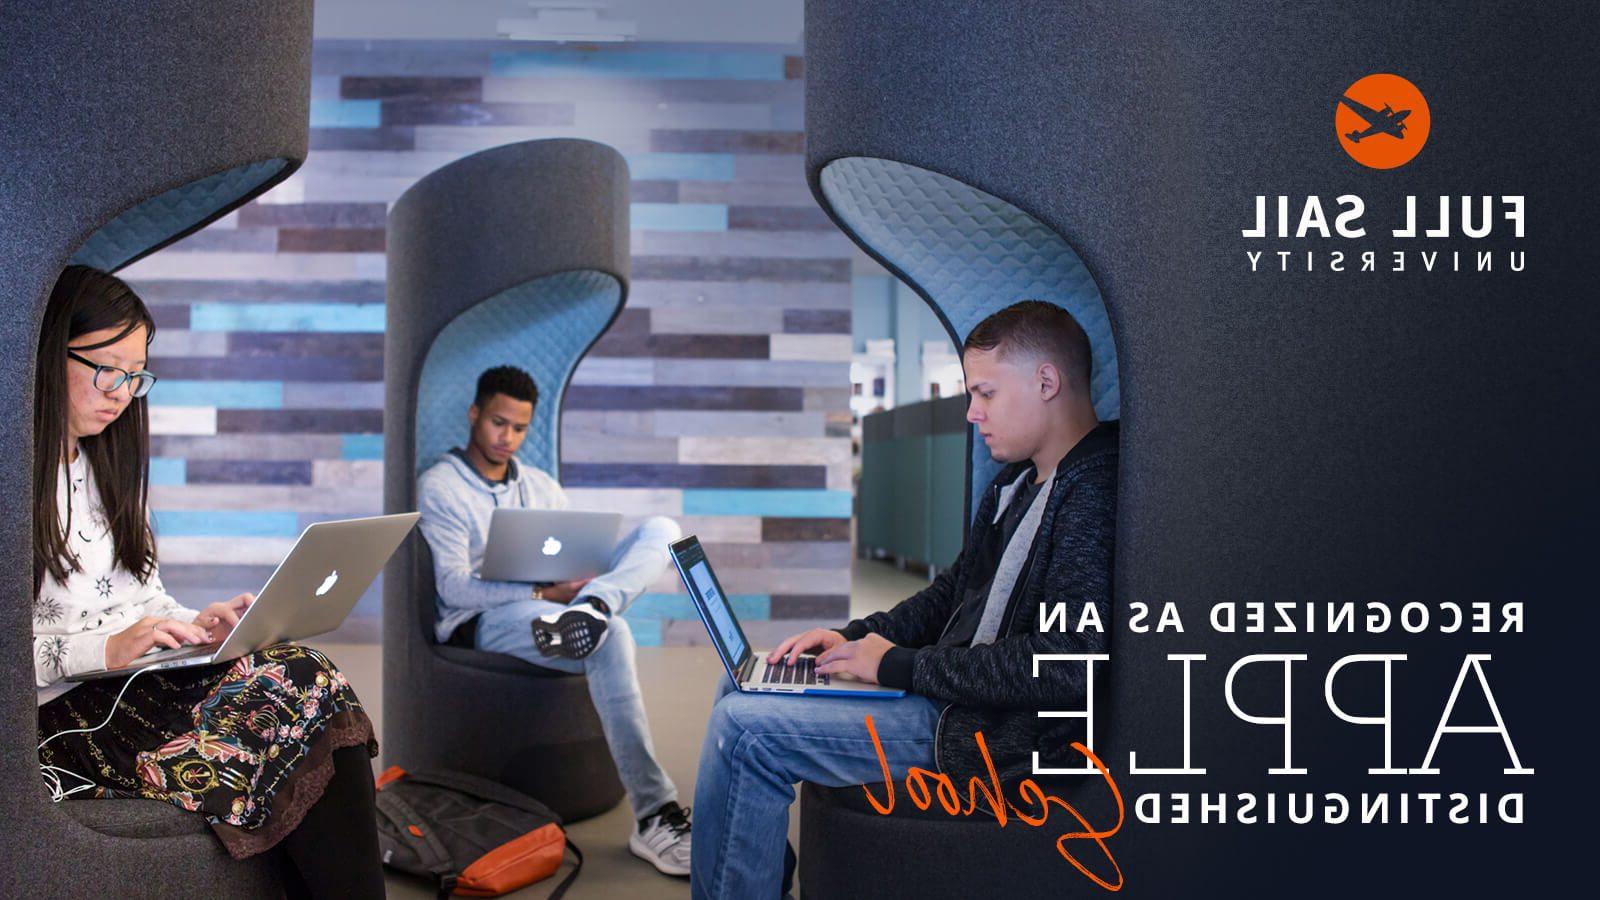 Three students using MacBooks sit on gray and blue chairs. The Full Sail logo is in the image’s top-left corner with the words “Recognized as an Apple Distinguished School” beneath it